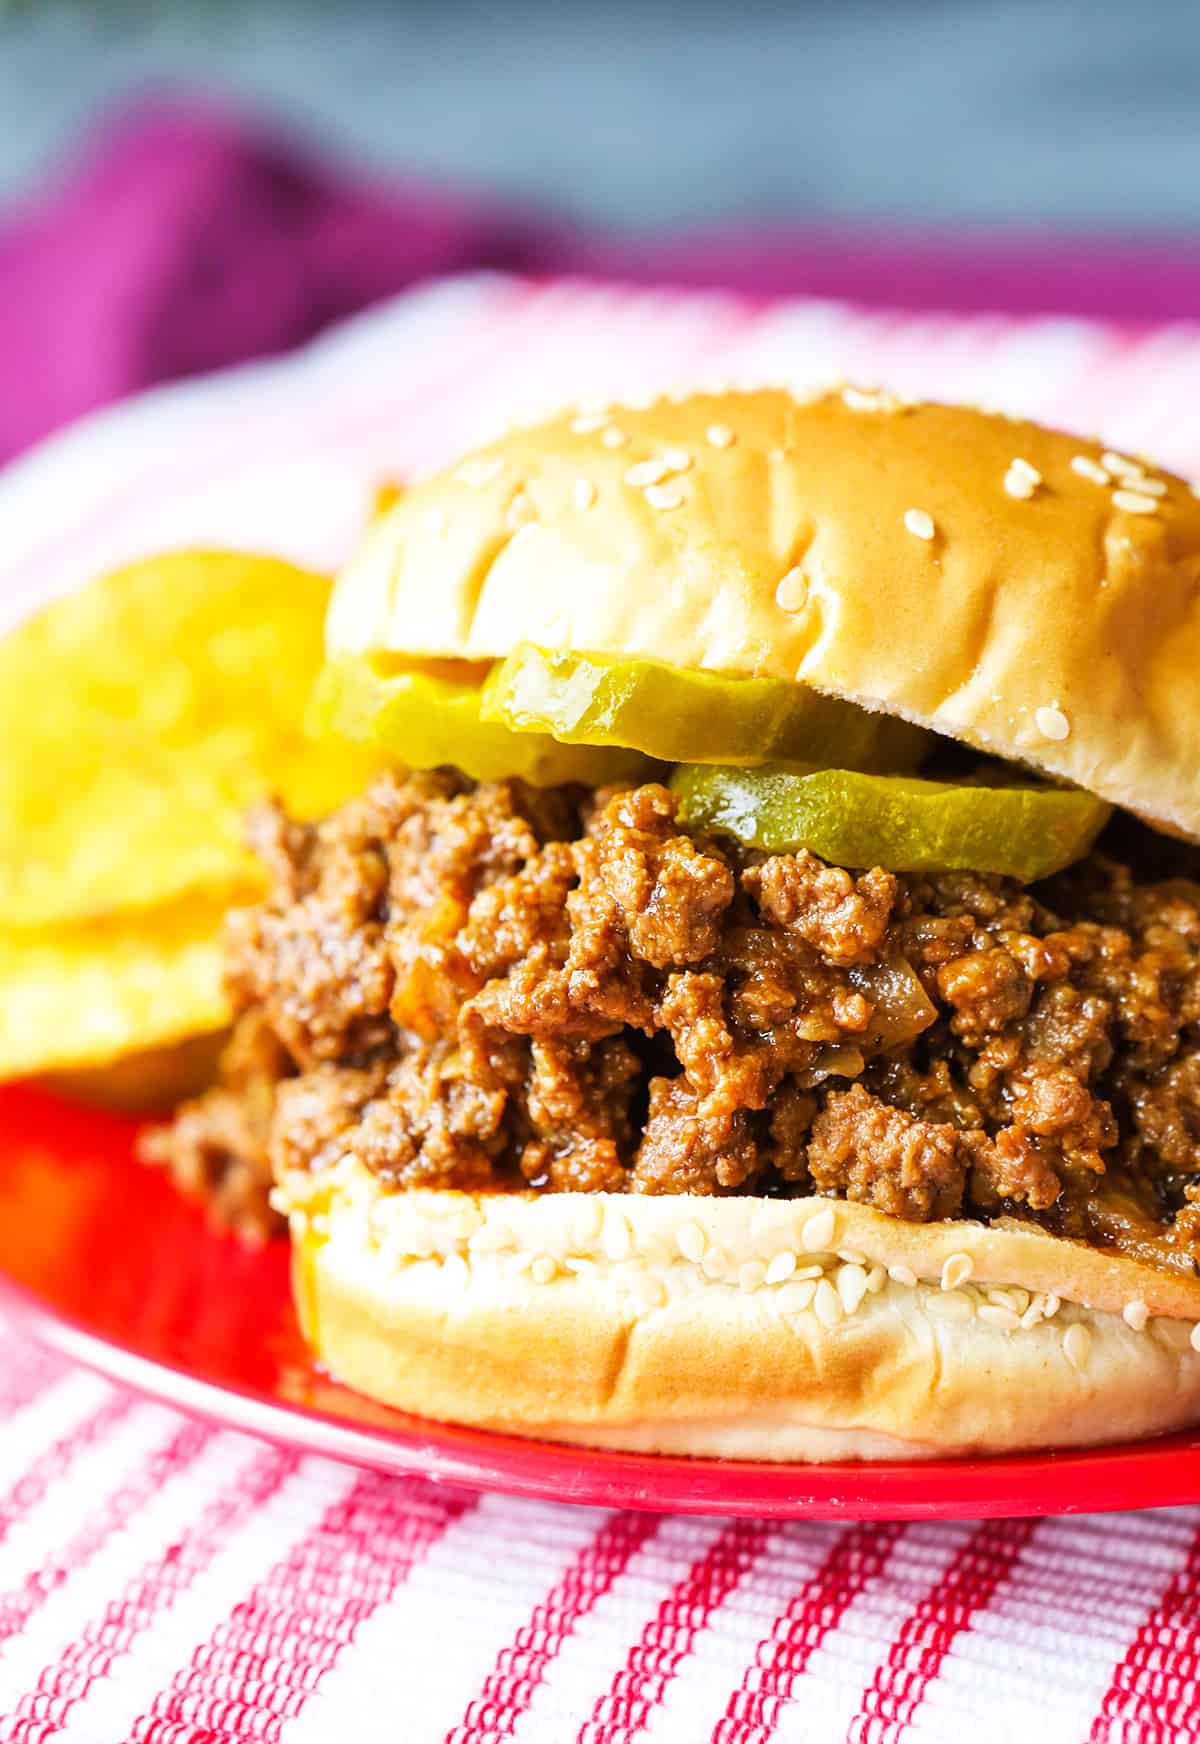 Close up of a loaded sloppy joe sandwich, sitting next to chips on a plate.